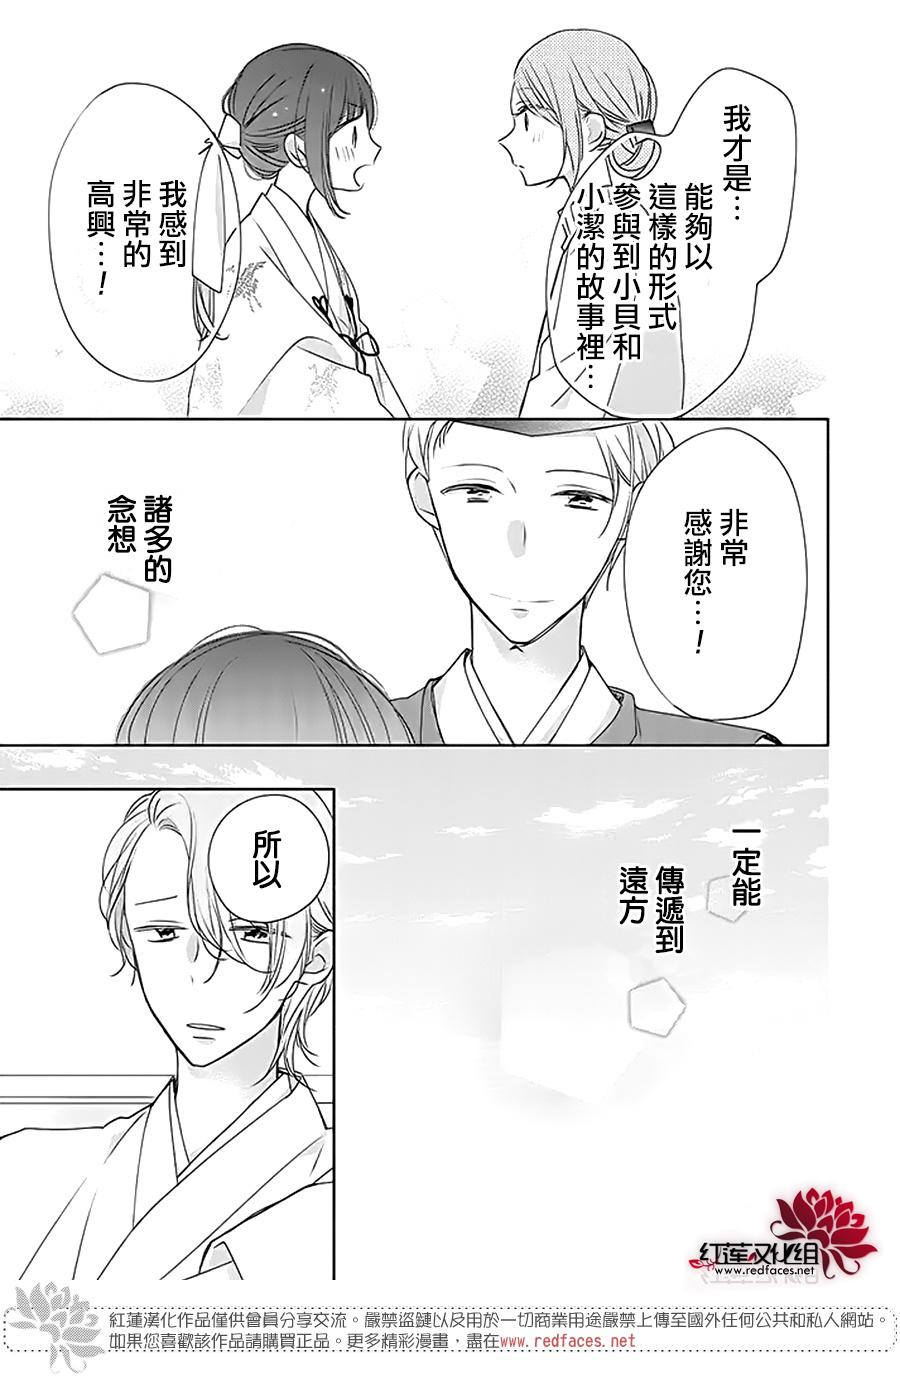 If given a second chance - 28話 - 6